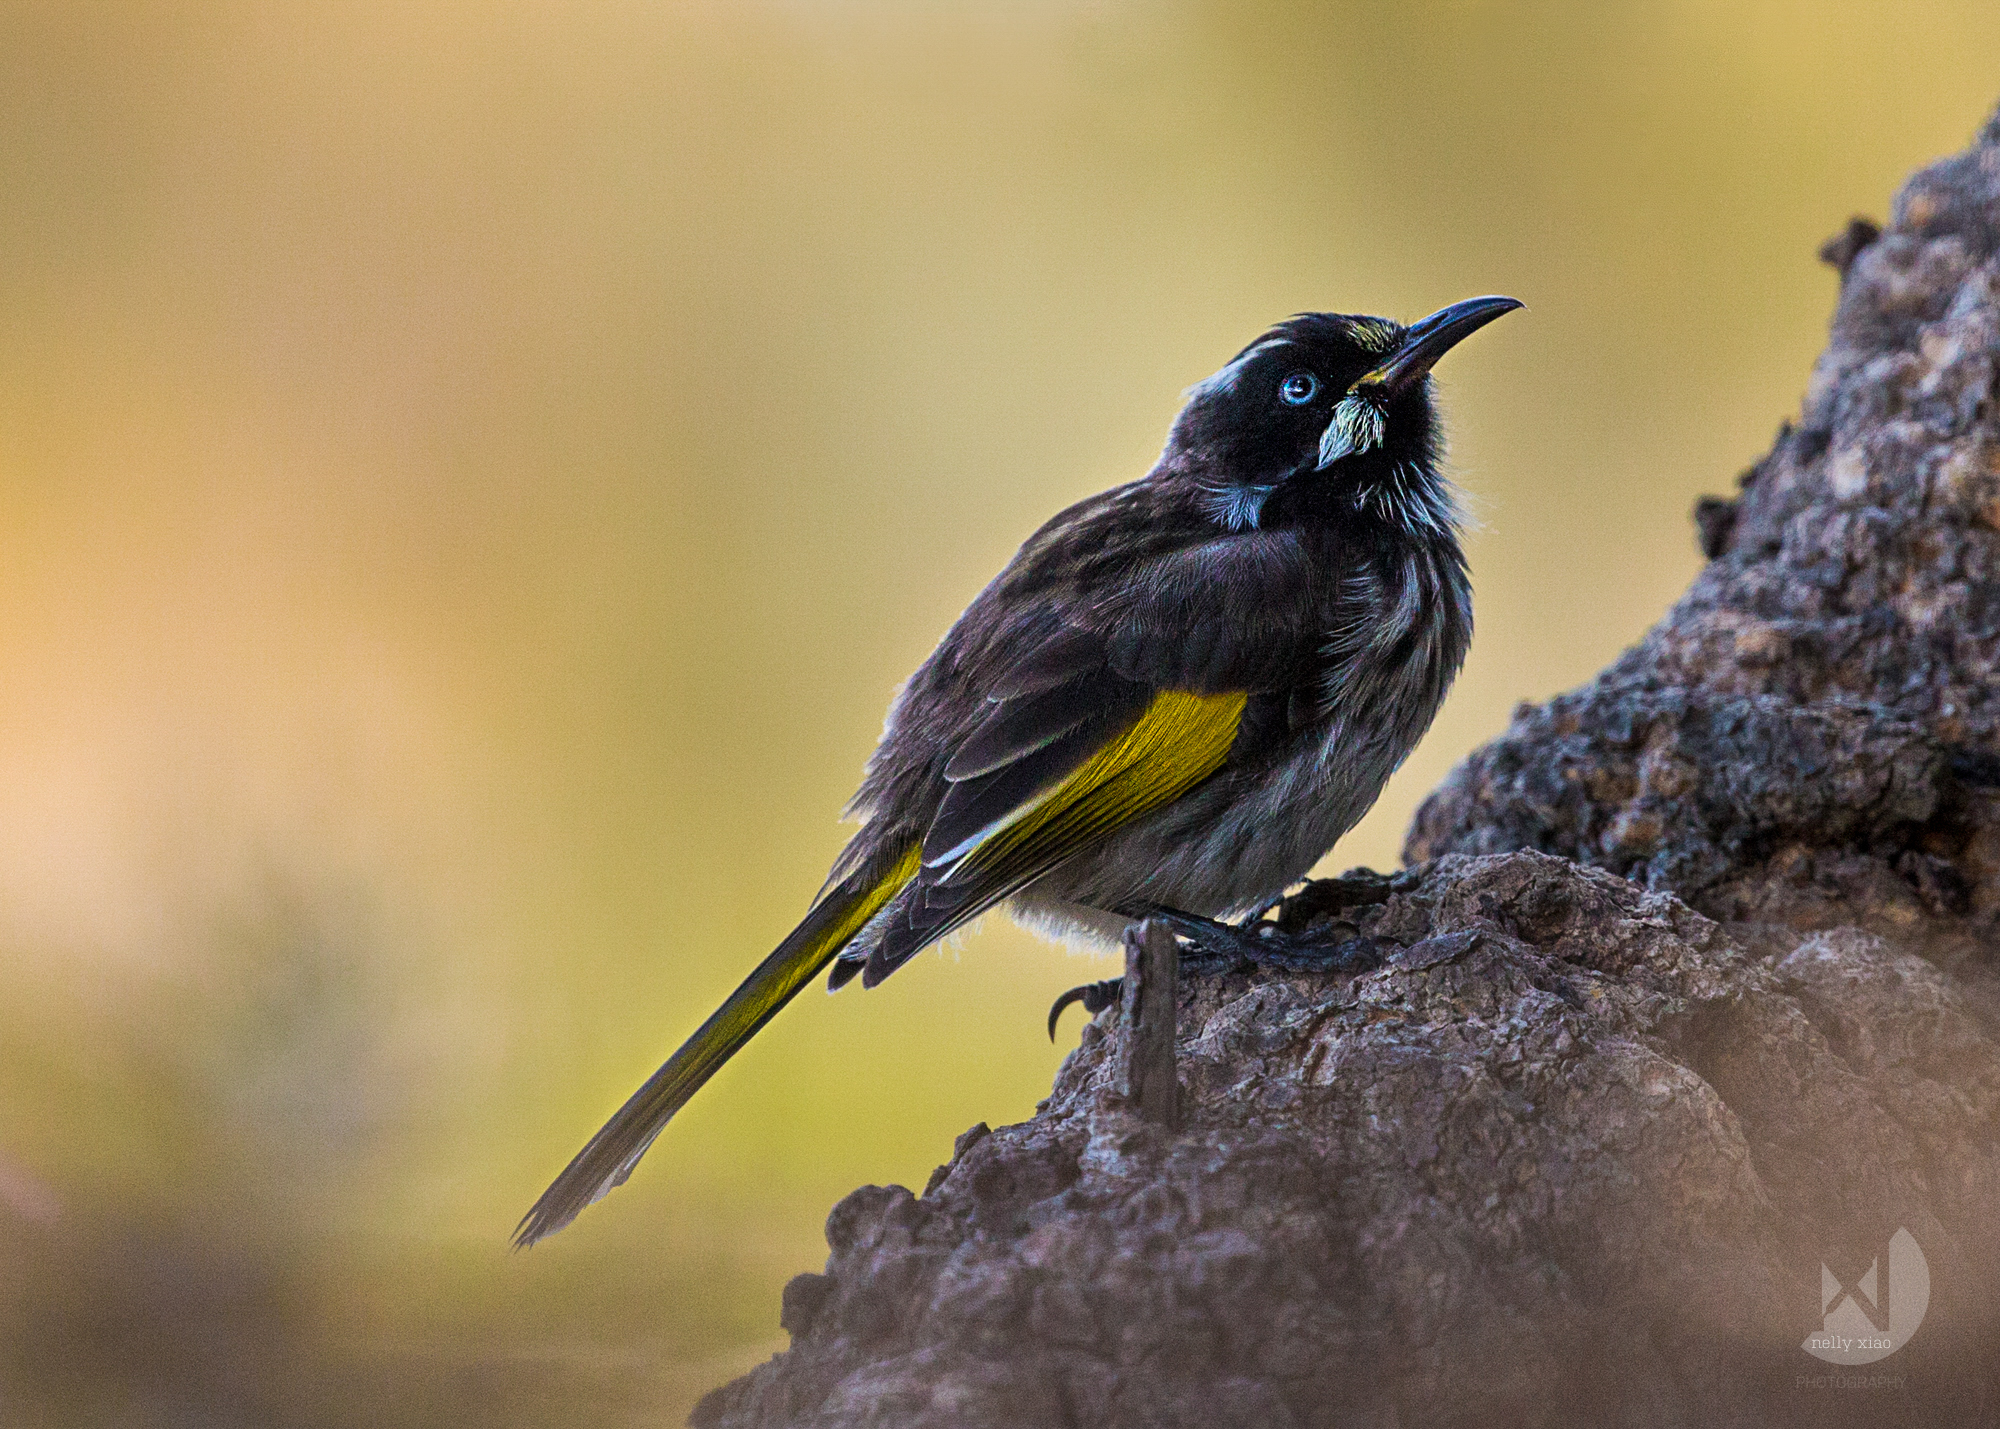   New holland honeyeater II   Manly North Head NSW, 2016 